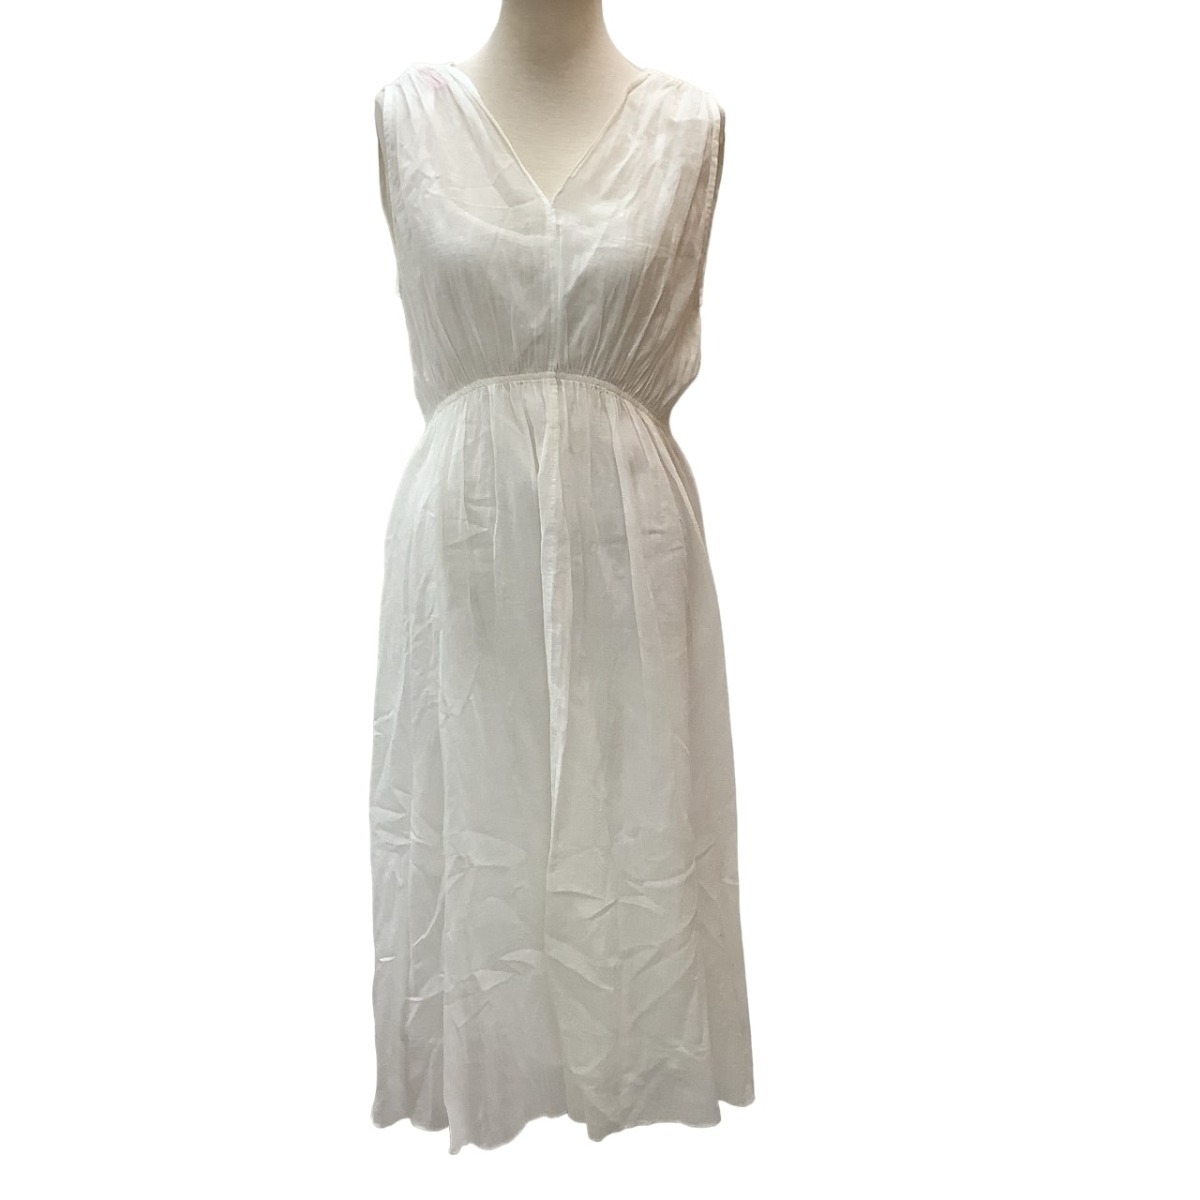 !! Babaghuribabag-li Jurgen Lehl lady's One-piece SIZE M white a little scratch . dirt equipped 